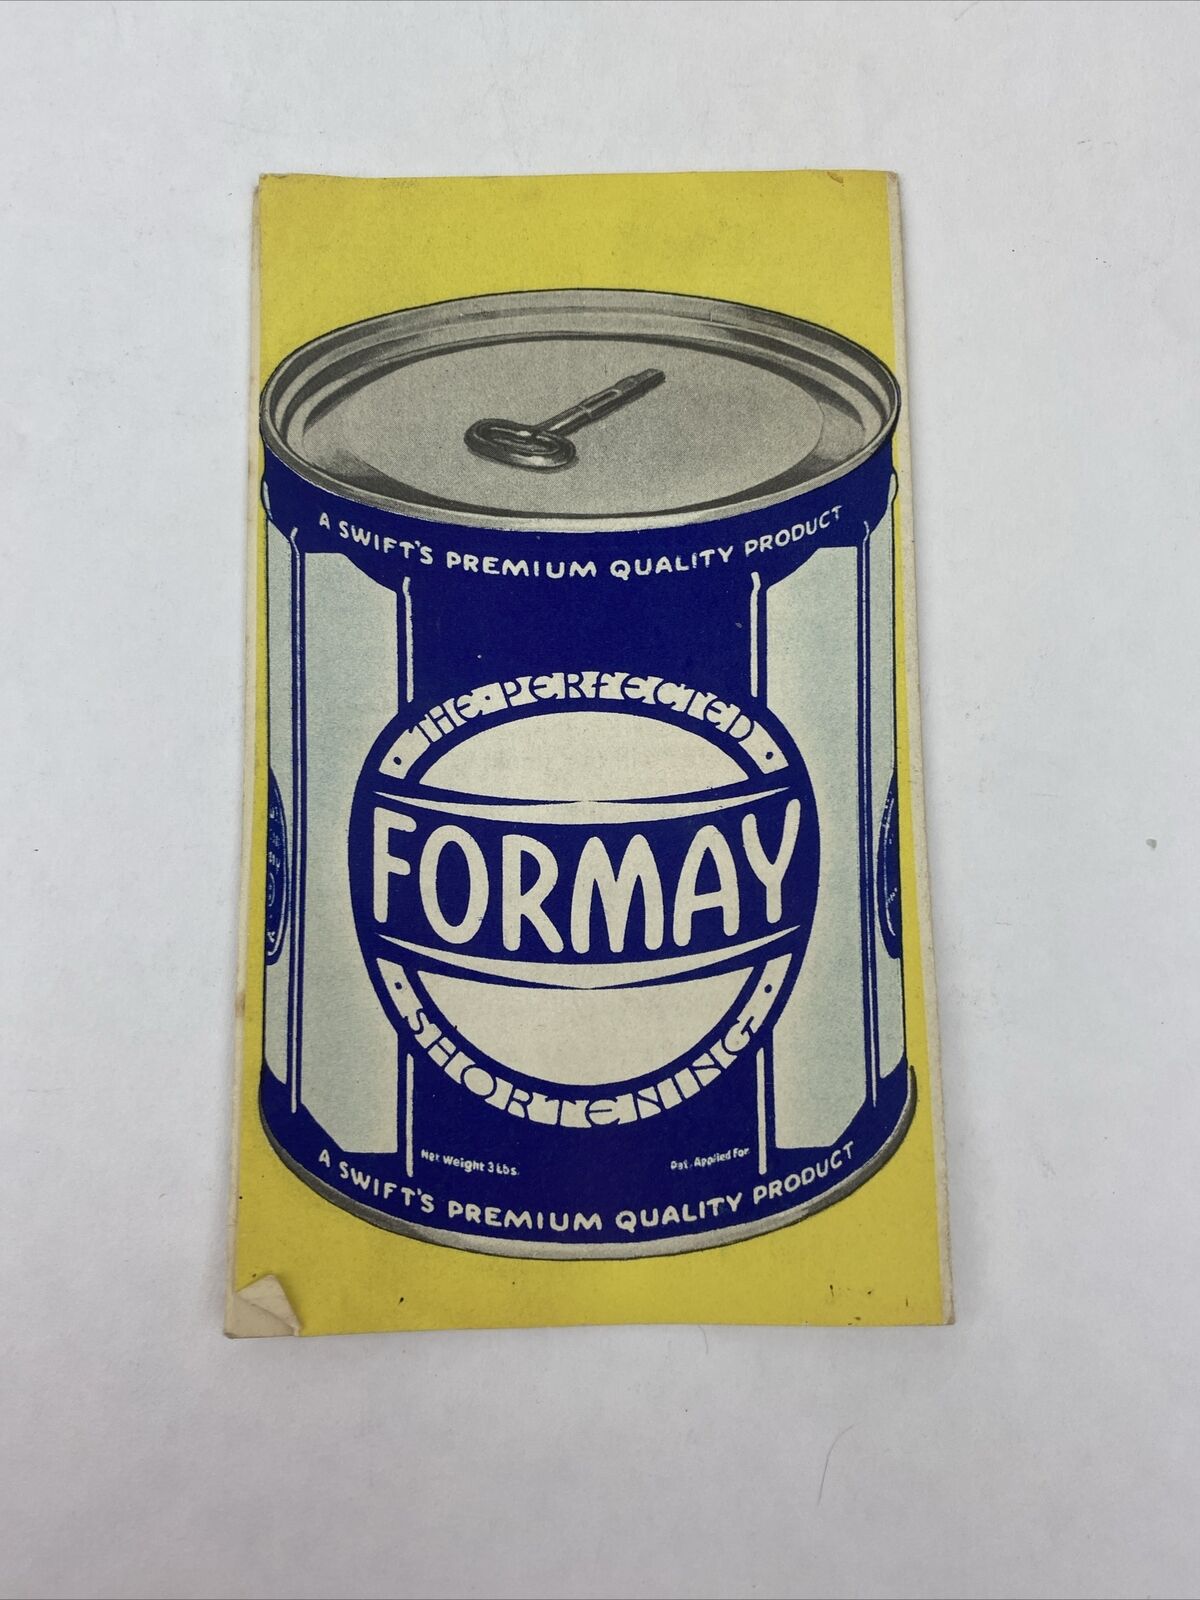 Vintage Formay Shortening Advertising Booklet with Recipes